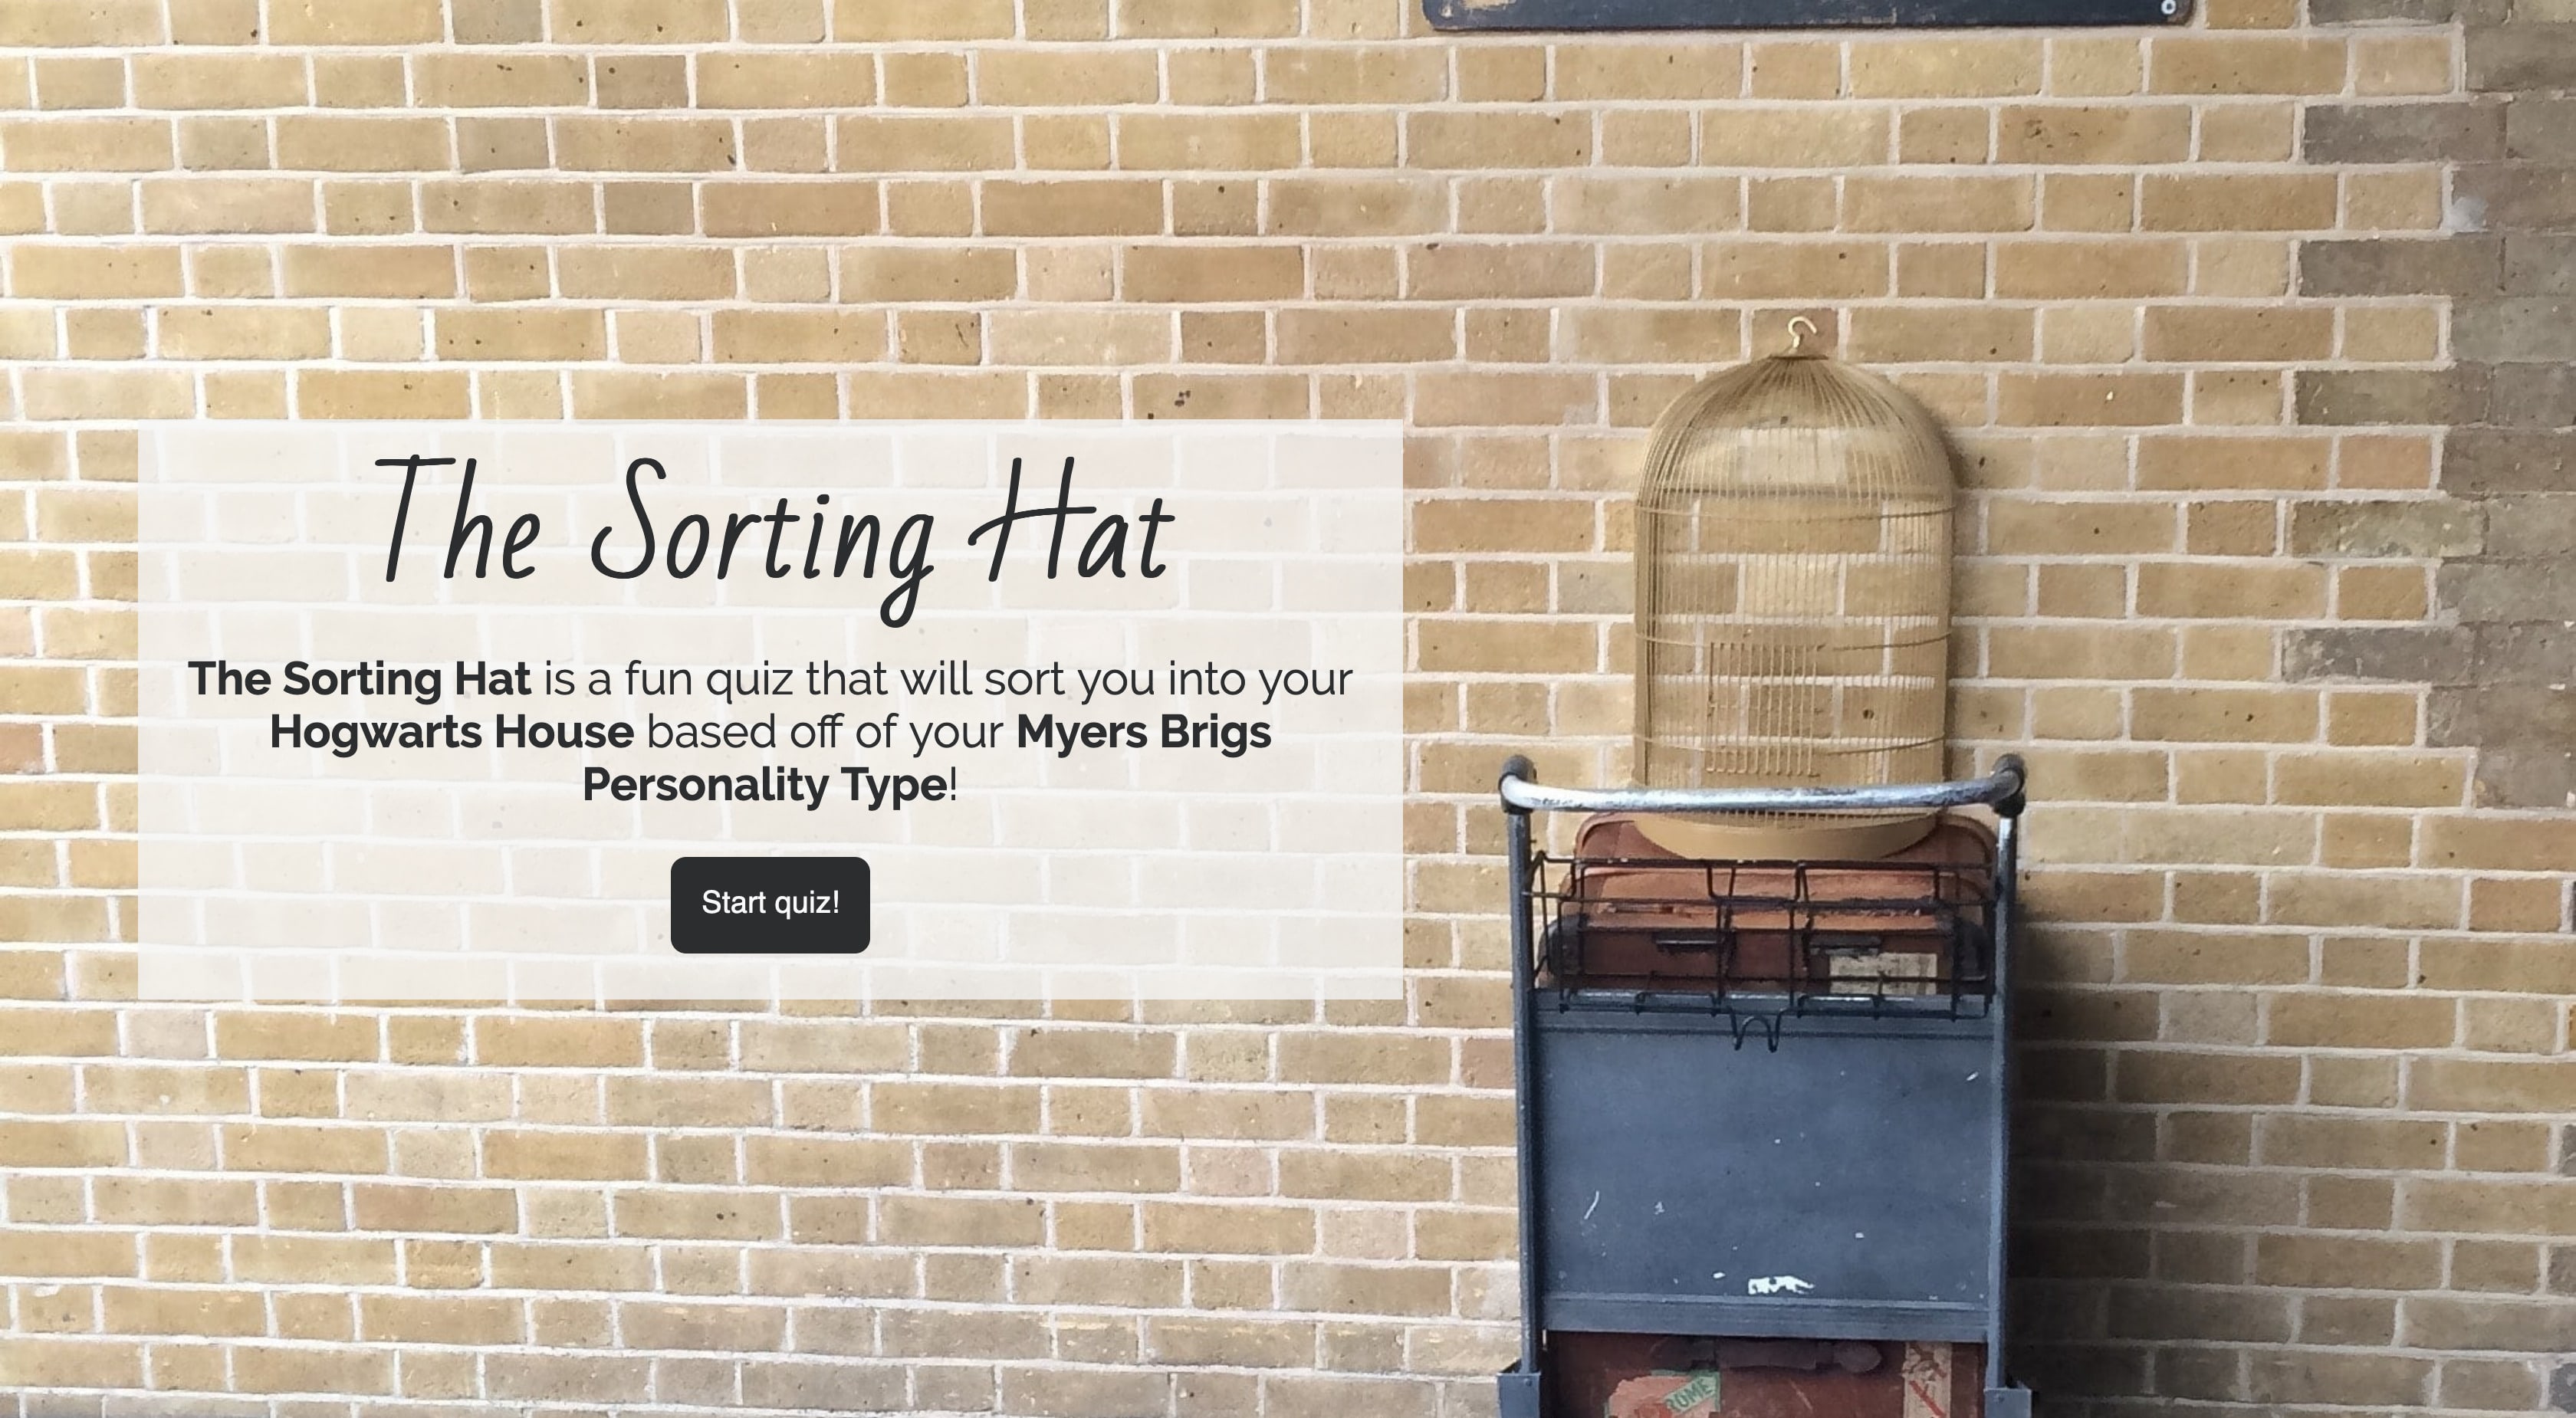 Screen capture of the landing screen for the Sorting Hat